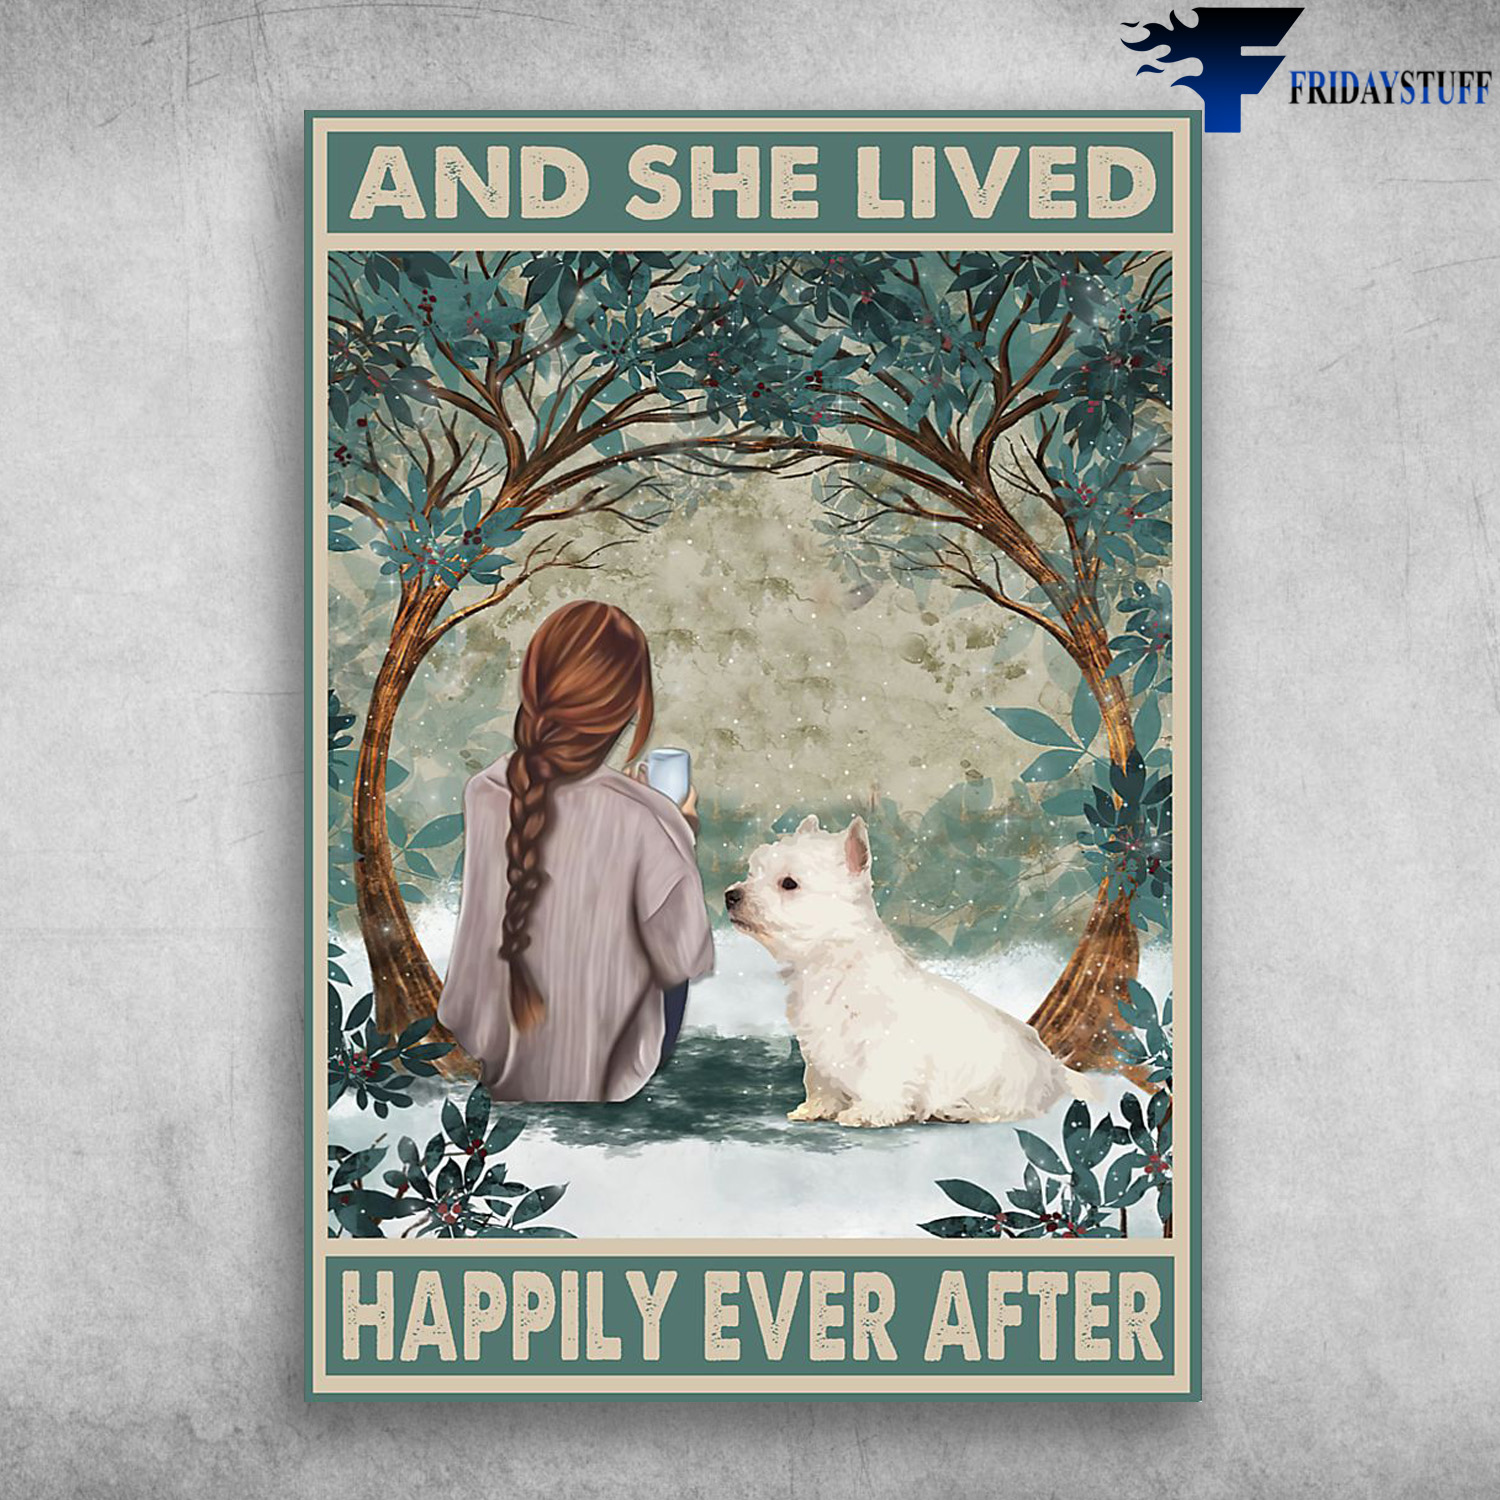 Girl And Westie Dog - And She Live, Happily Ever After